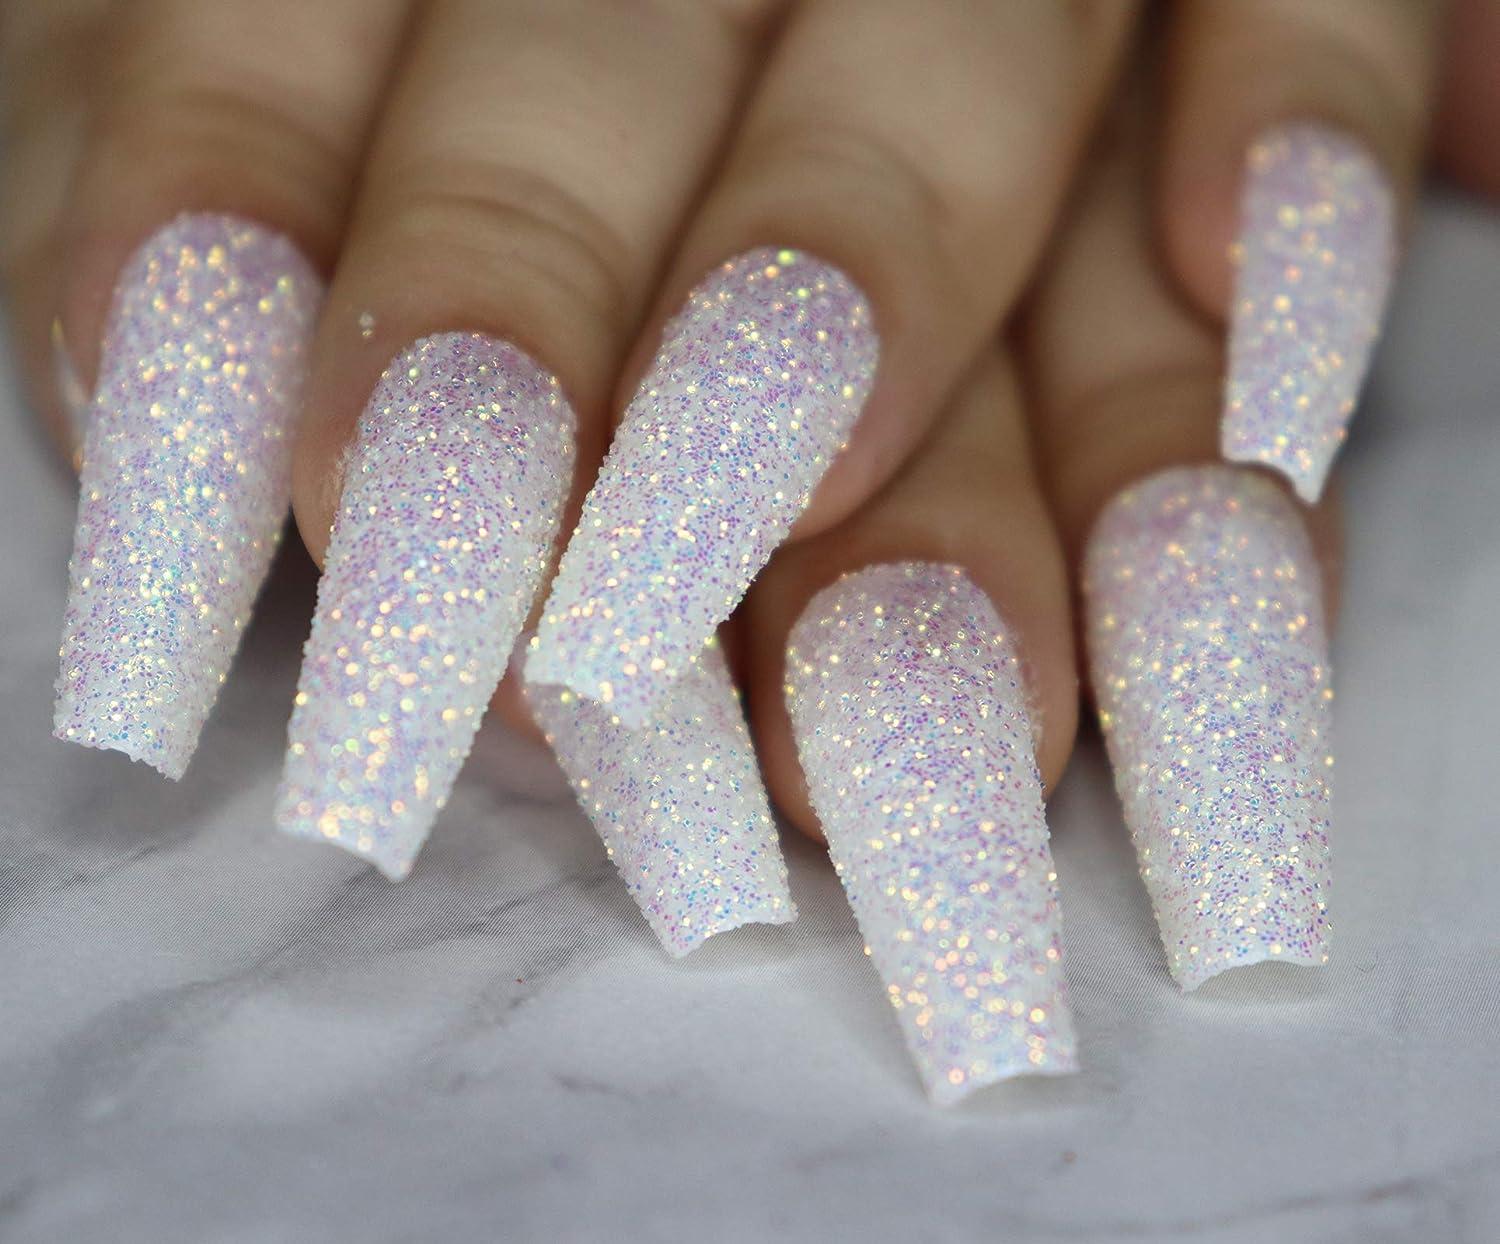 White and Blue glitter nails by SarahJacky on DeviantArt